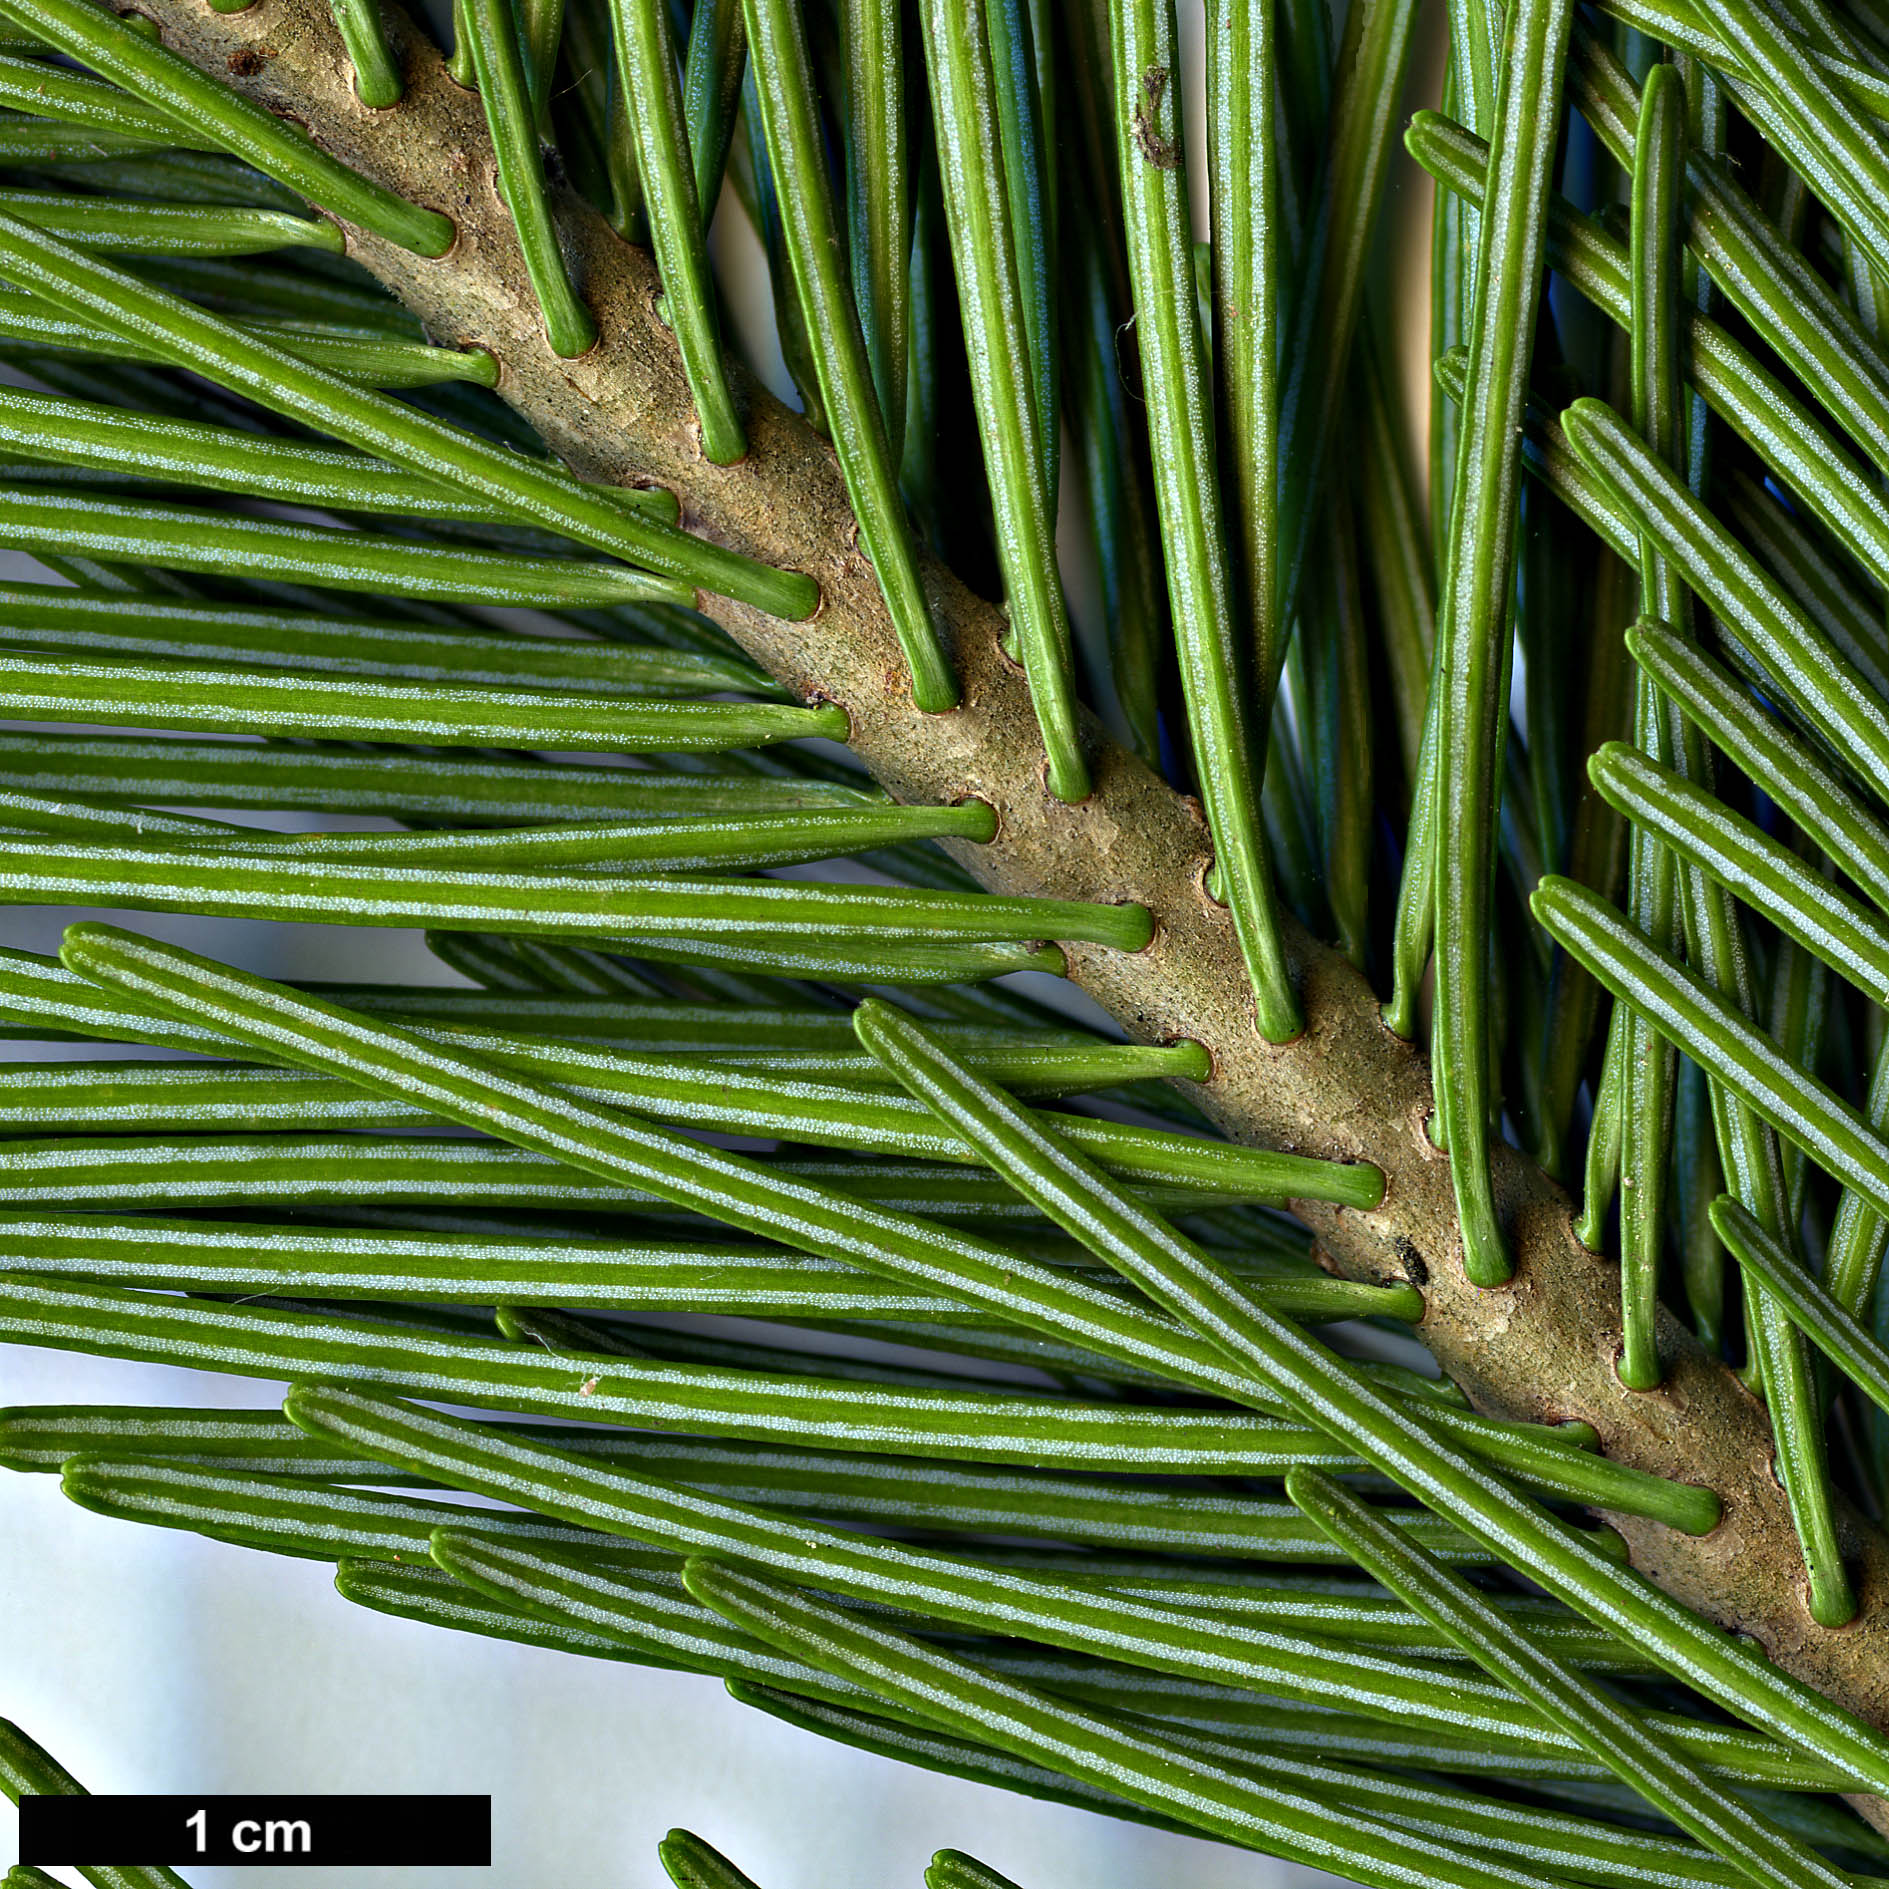 High resolution image: Family: Pinaceae - Genus: Abies - Taxon: sibirica